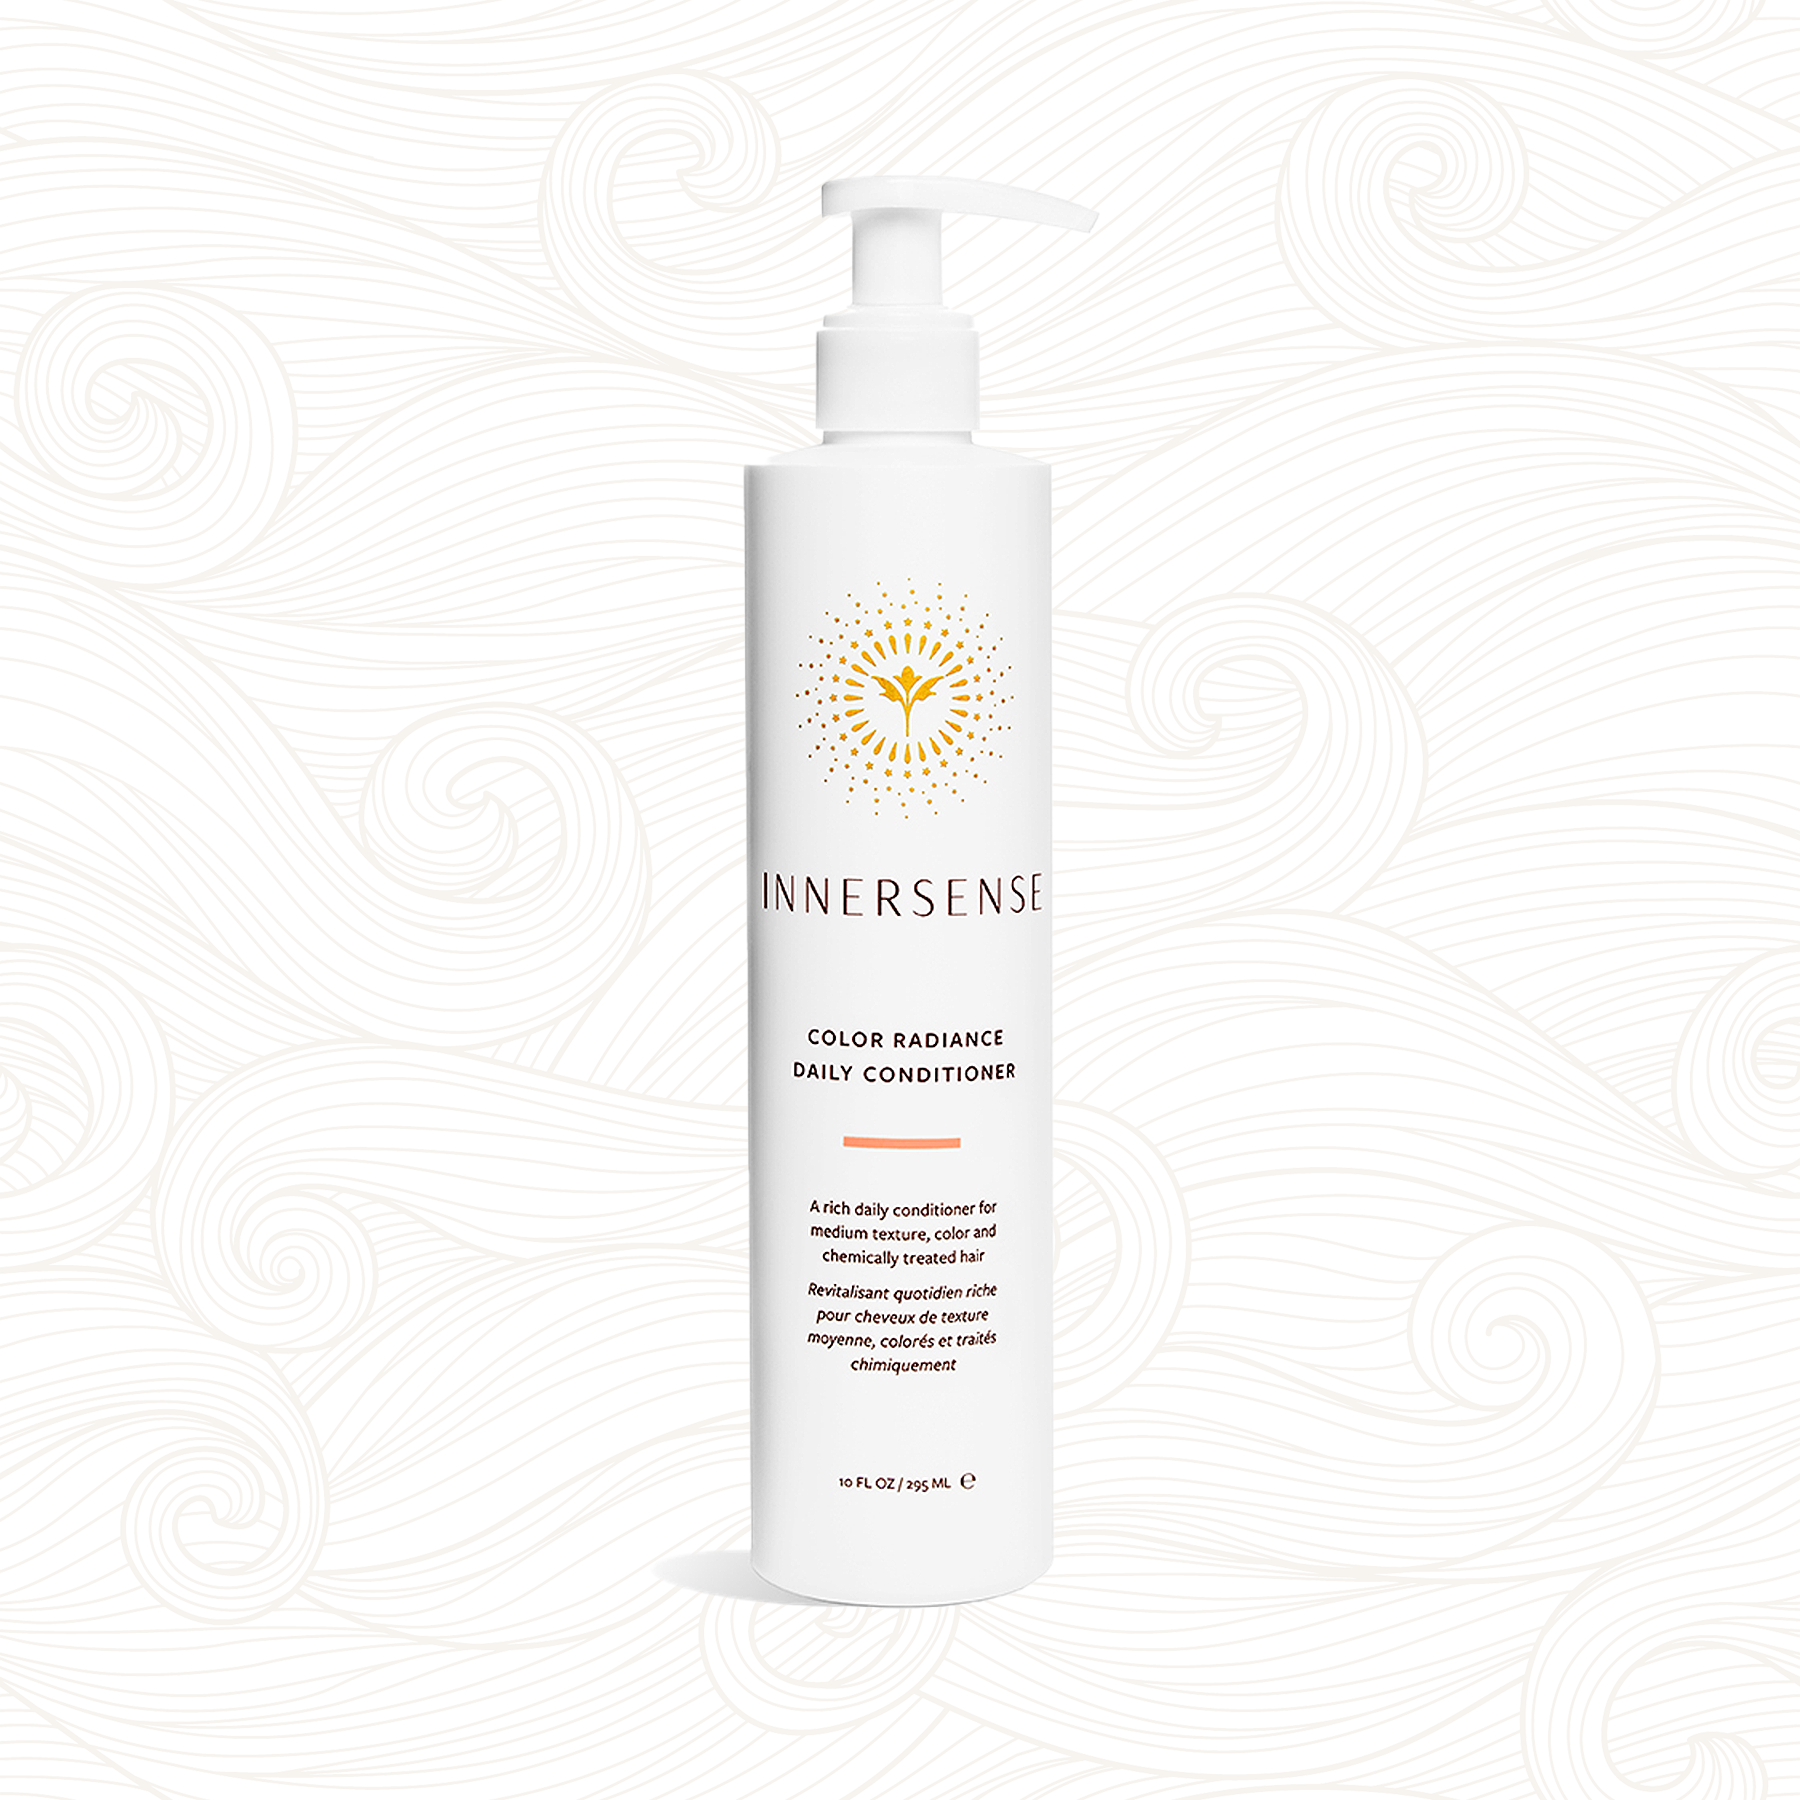 Innersense | Color Radiance Daily Conditioner /ab 295ml Conditioner Innersense